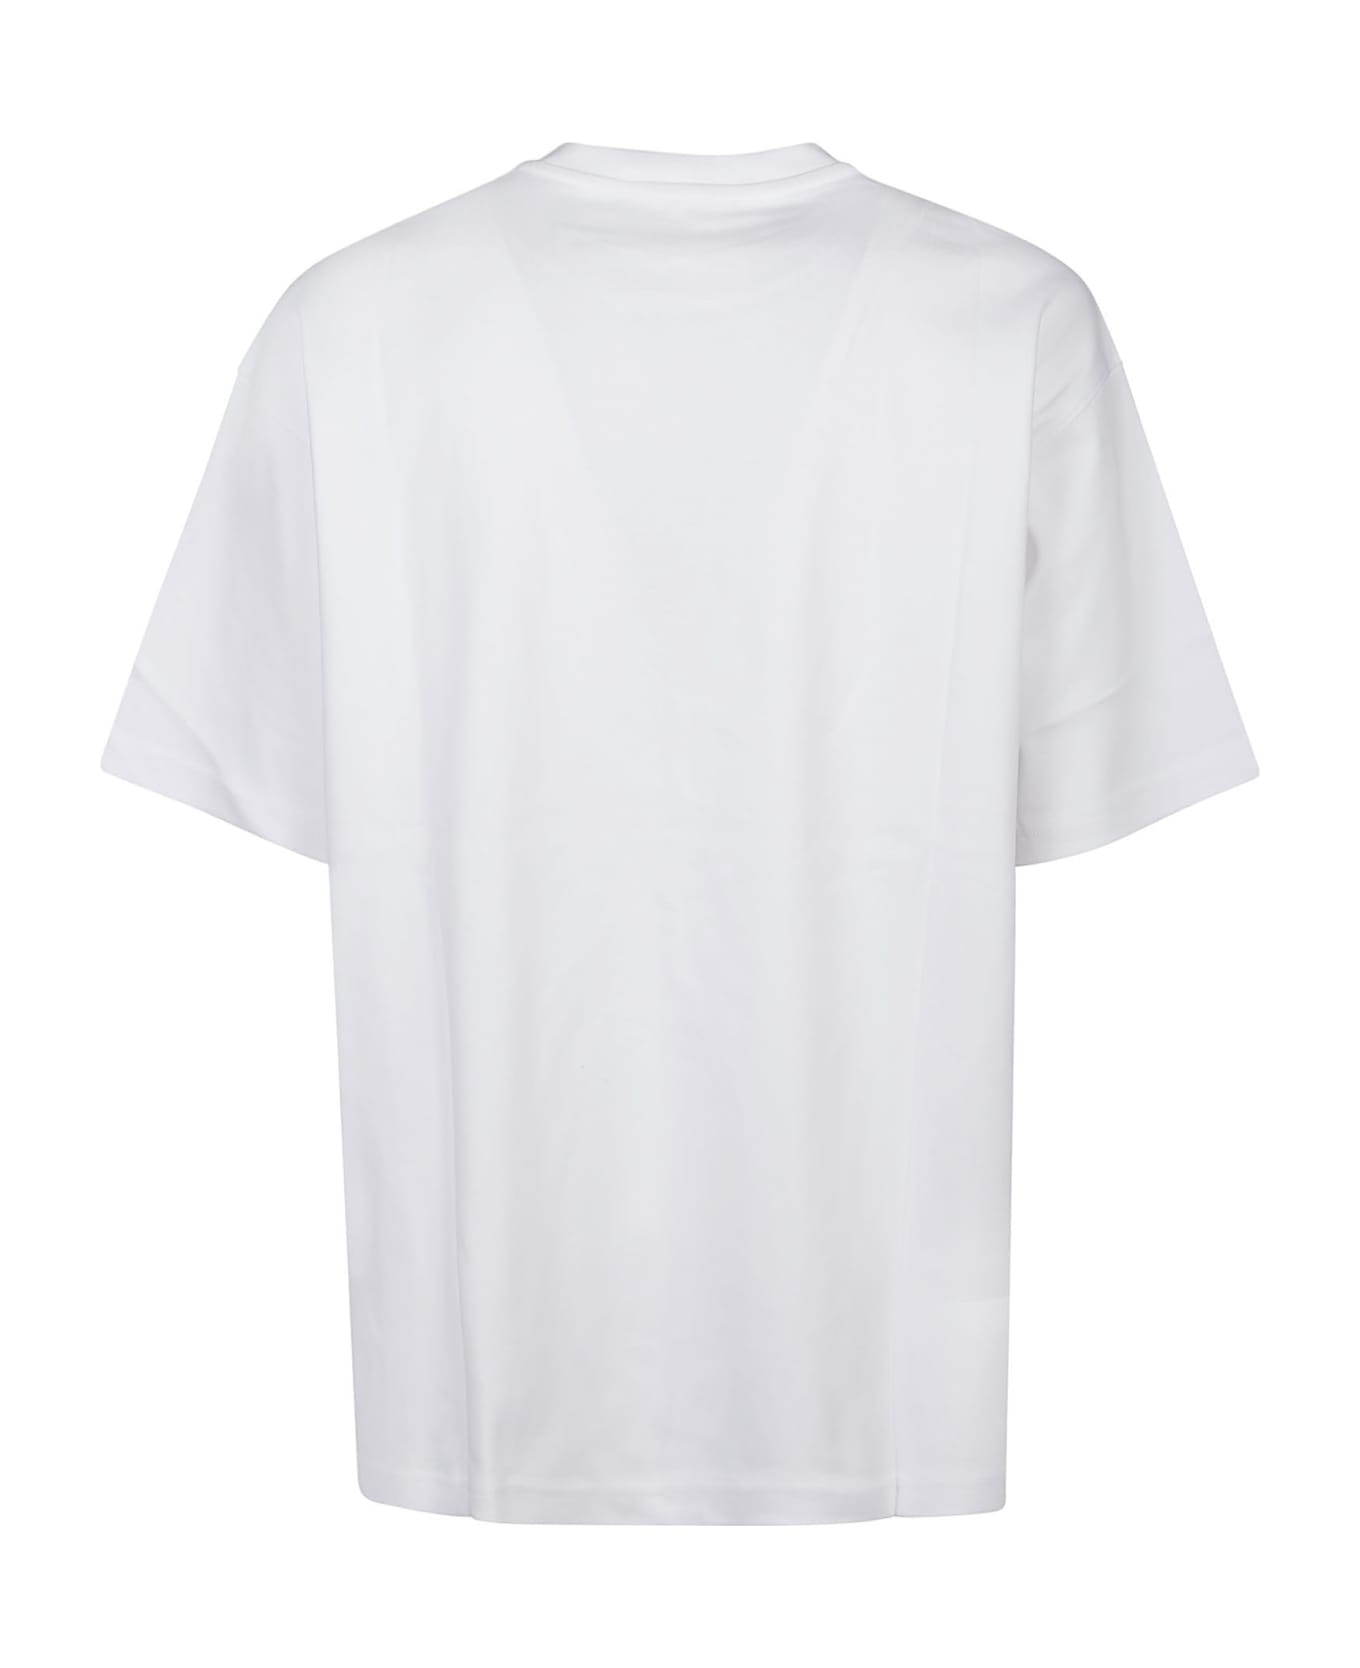 Versace Jeans Couture Logo Dripping T-shirt - White